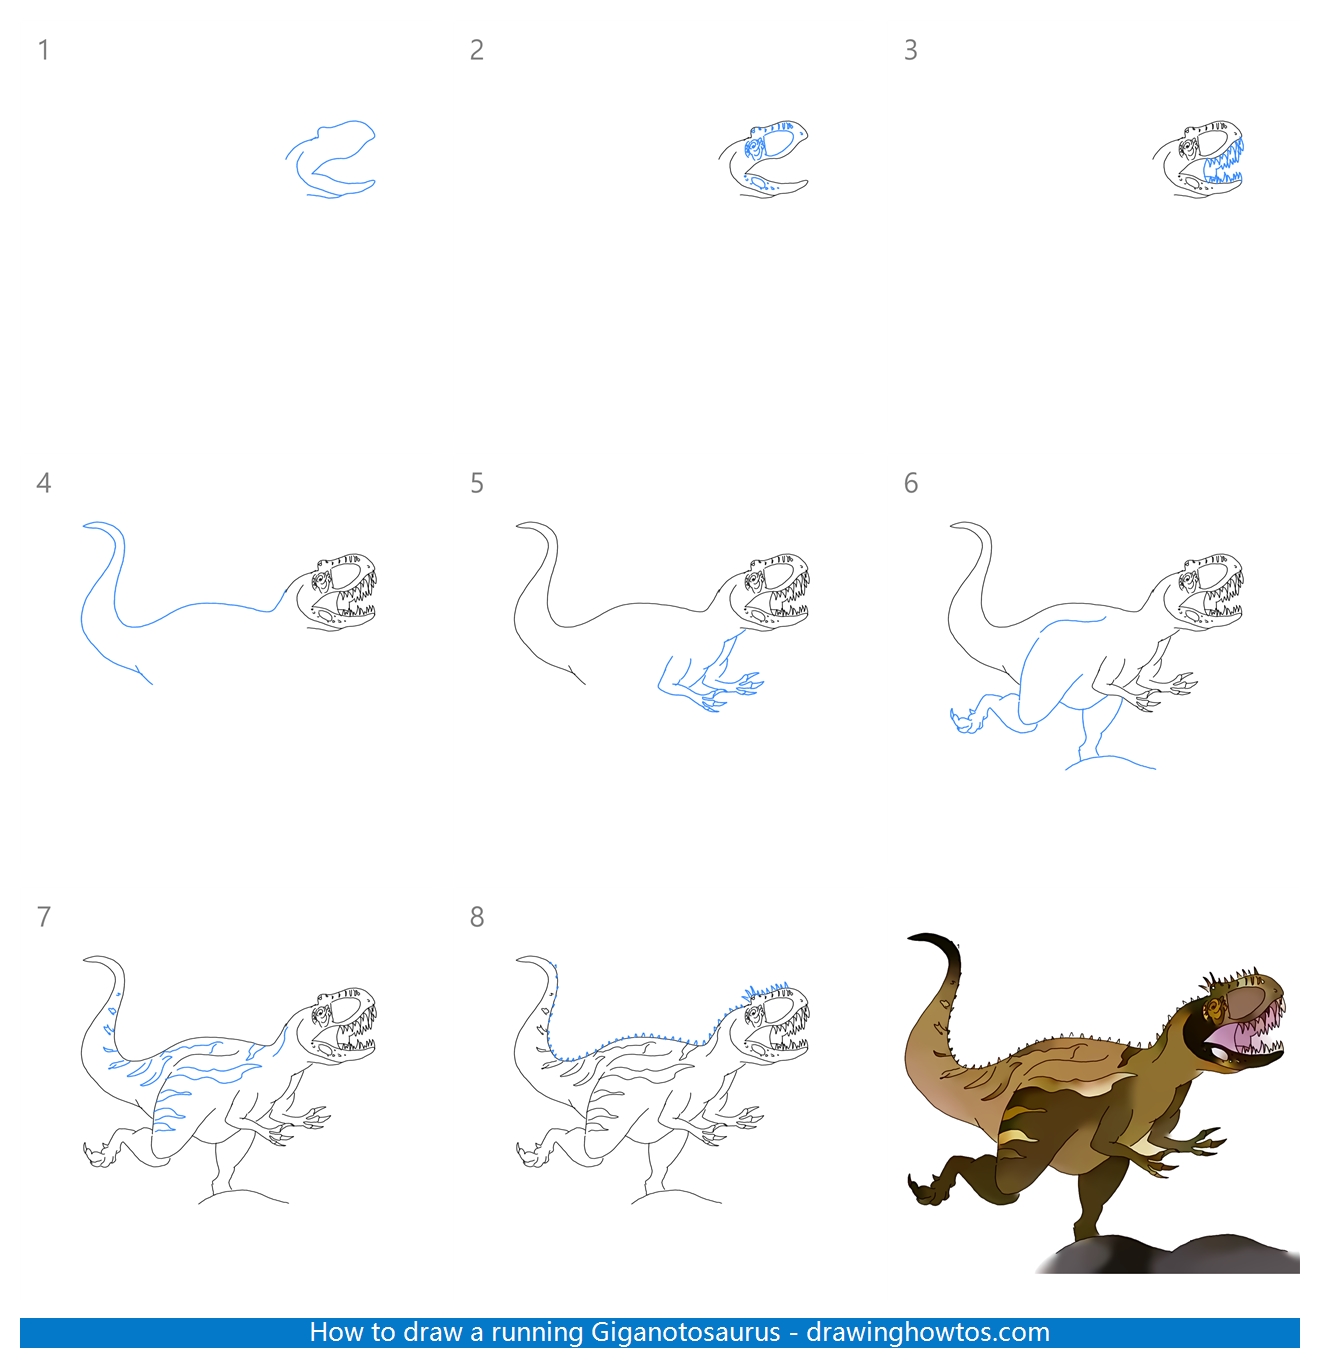 How to Draw a Running Giganotosaurus Step by Step